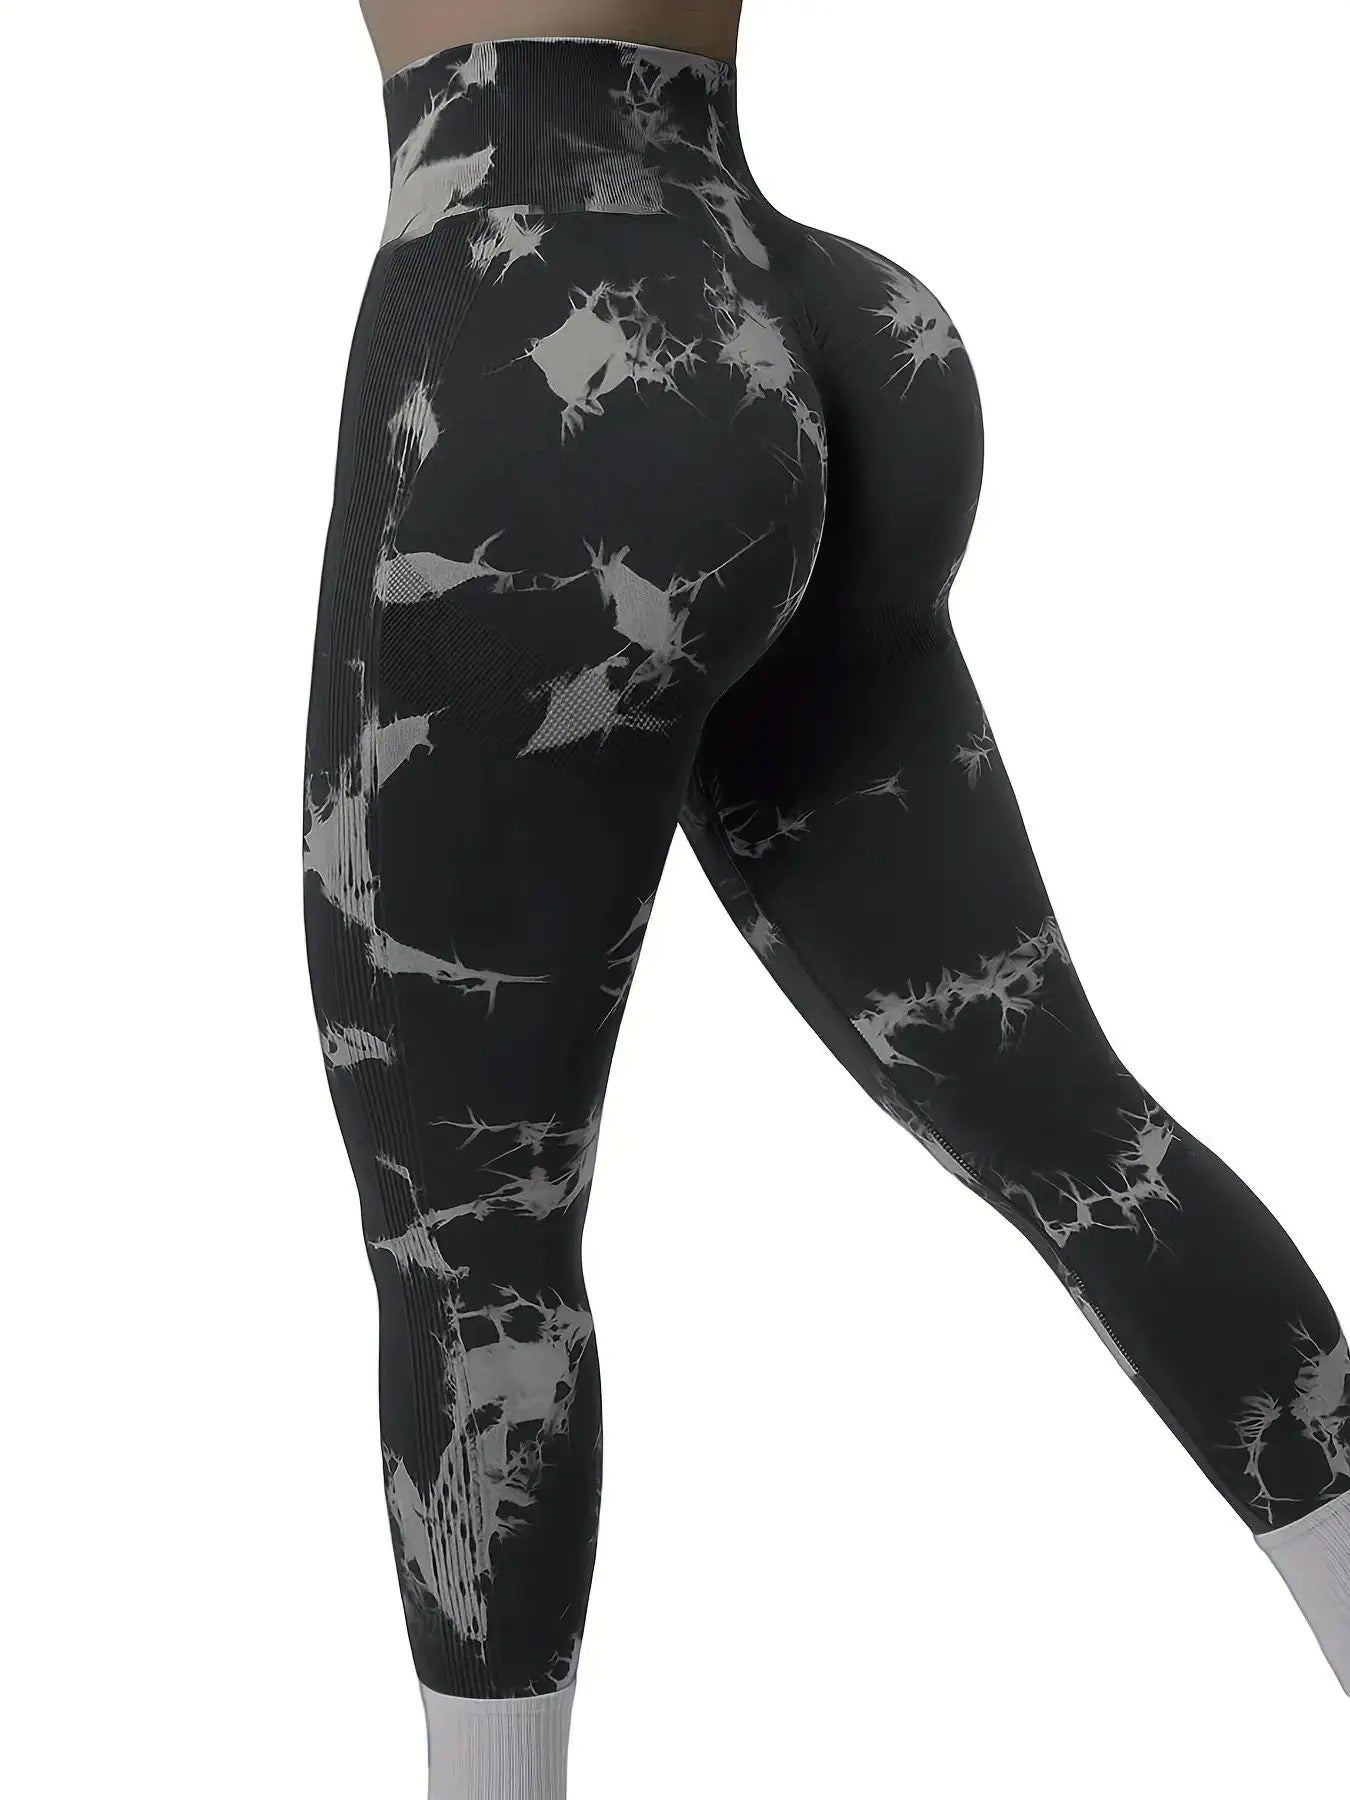 High Rise Workout Leggings from Apollo Box